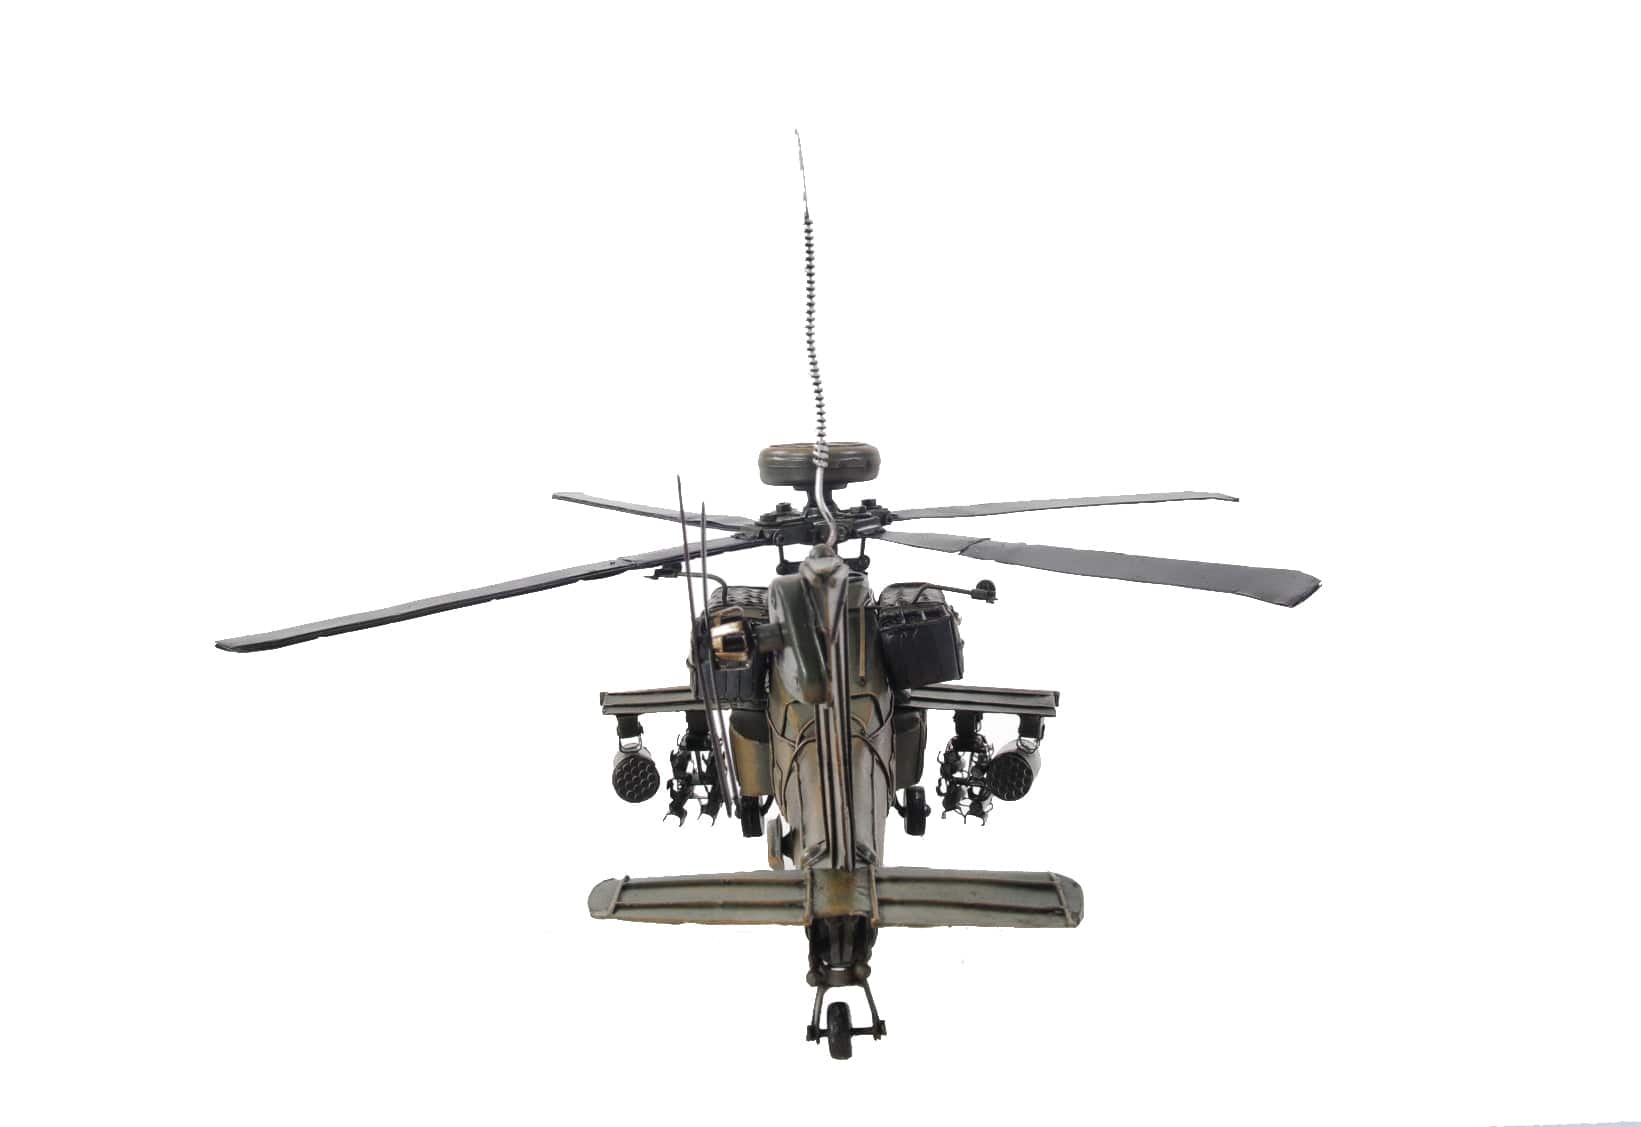 ALDO Creative Arts Collectibles Scale Model L: 18 W: 17 H: 9 Inches / NEW / Iron Boeing AH-64 Apache US Army’s Primary Attack helicopter Deck Top Metal Model